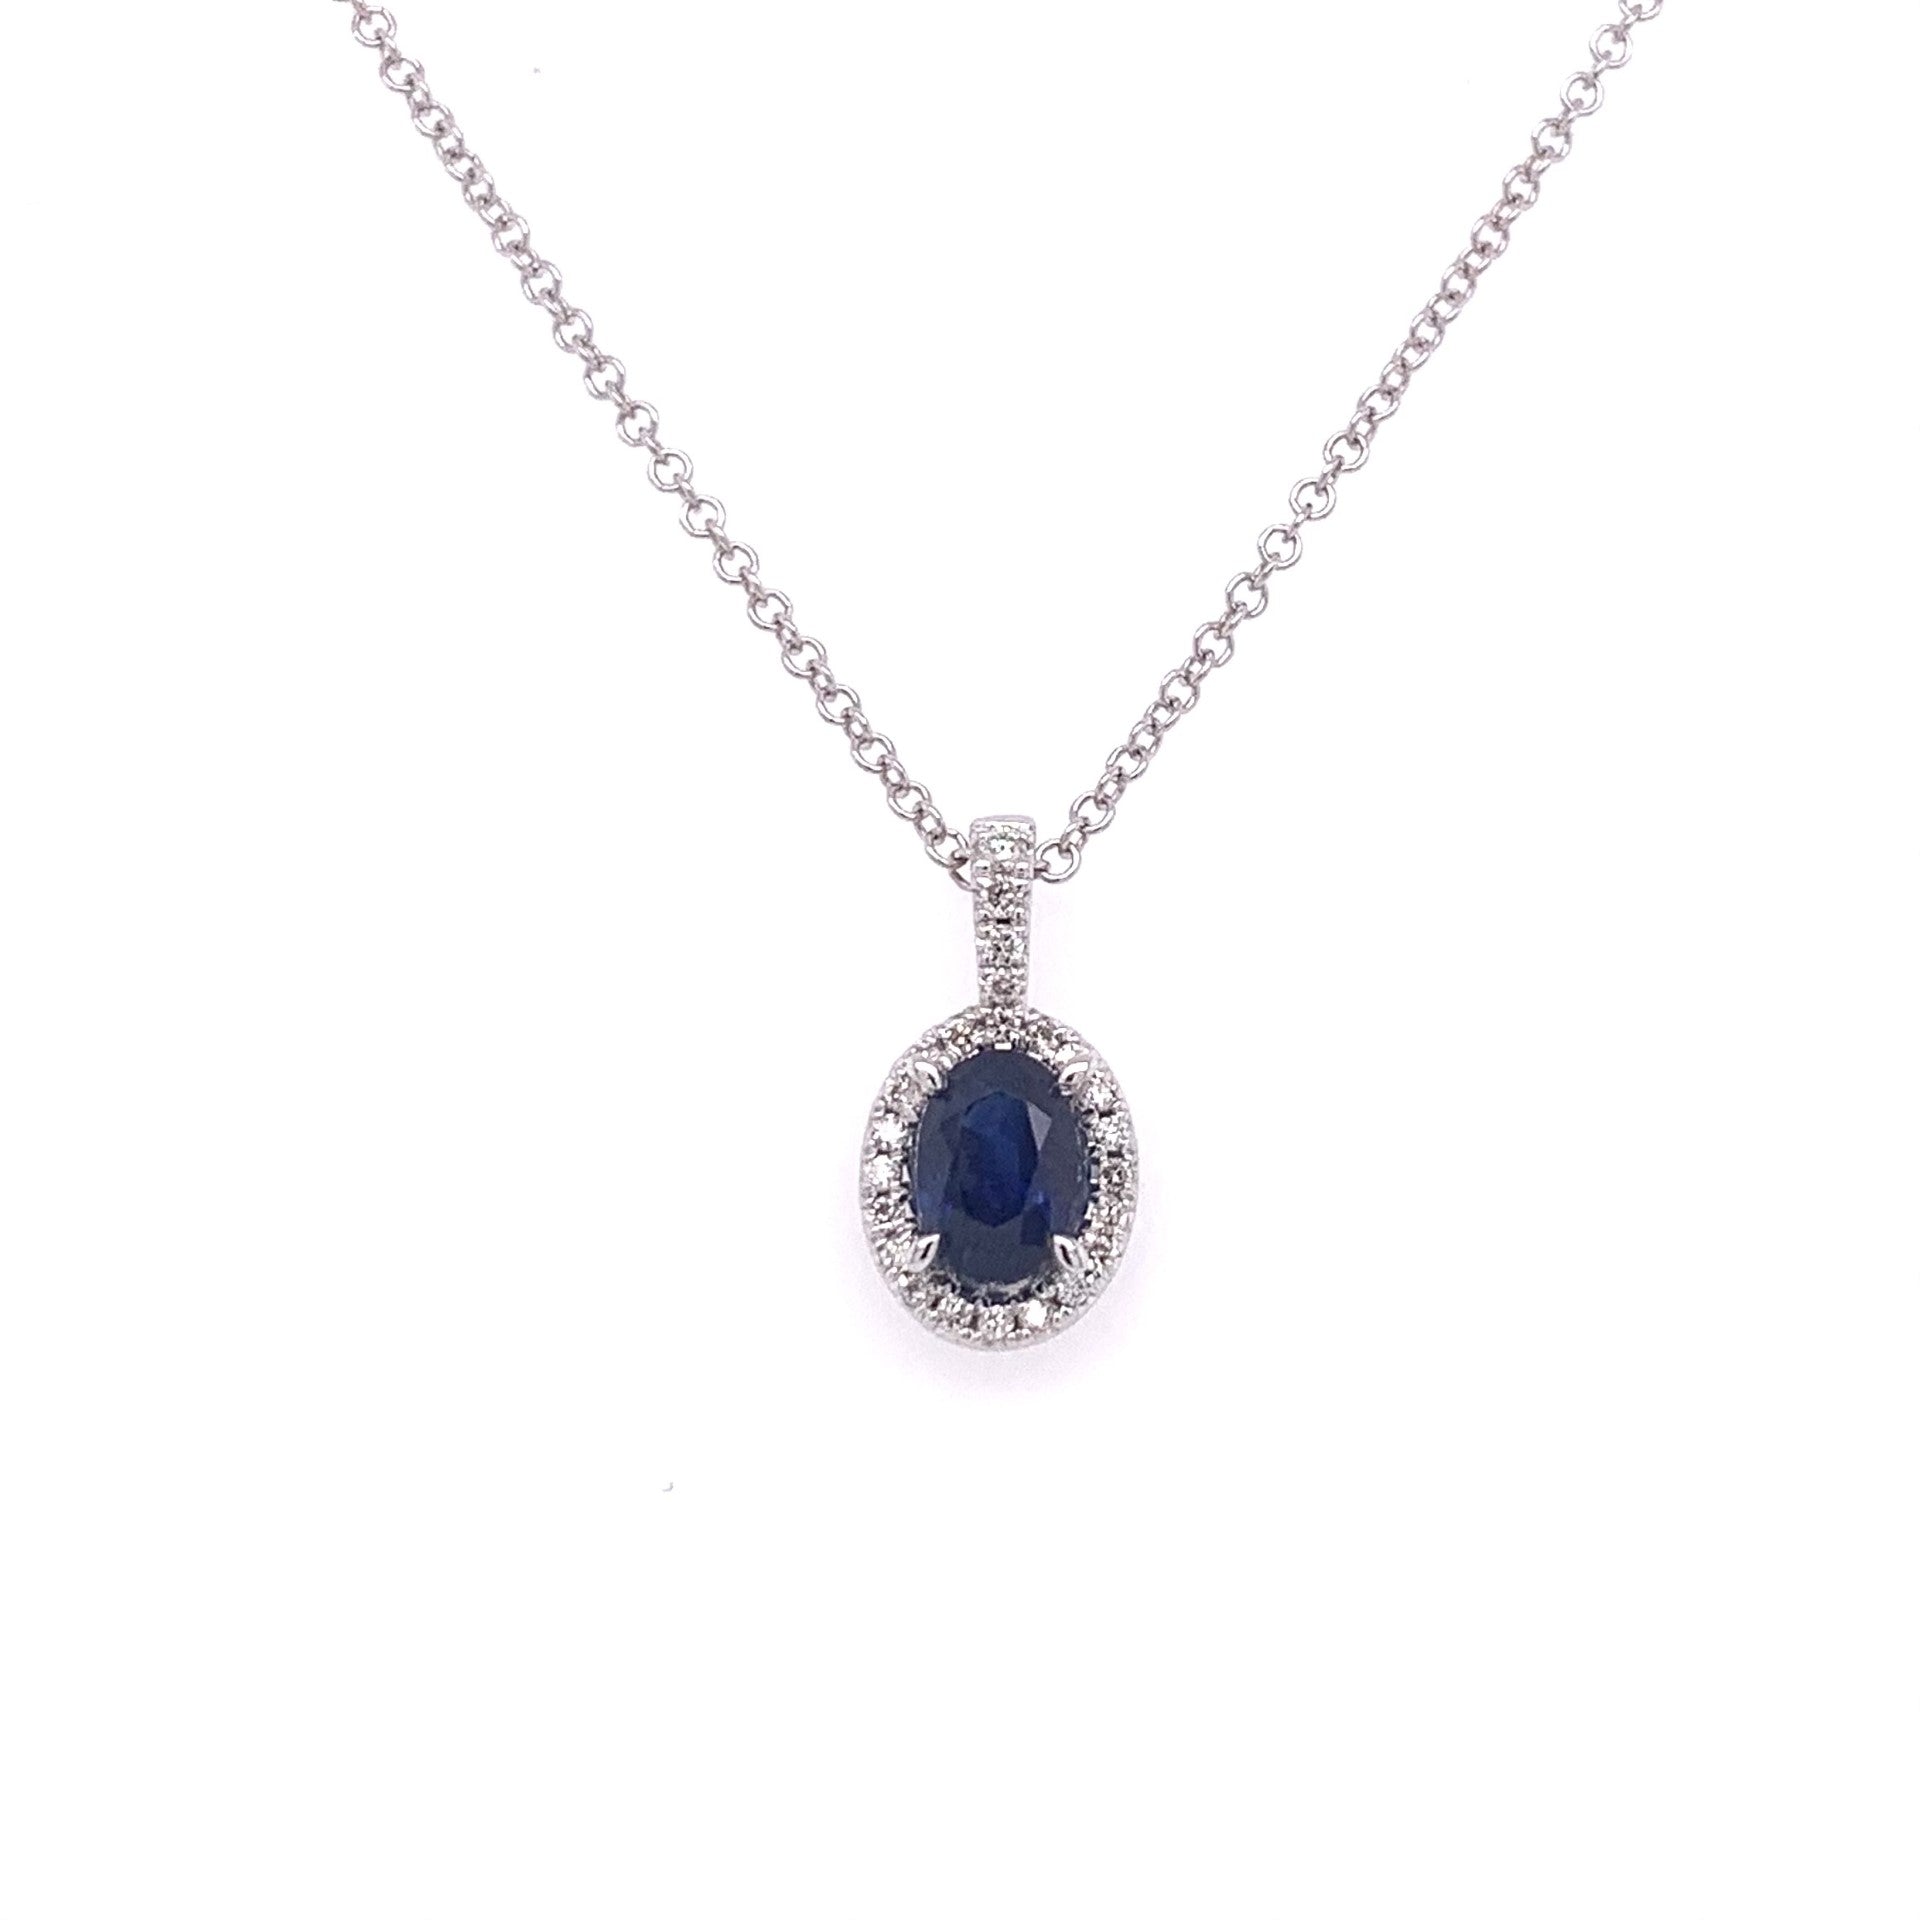 10K White Gold Sapphire and Diamond Necklace